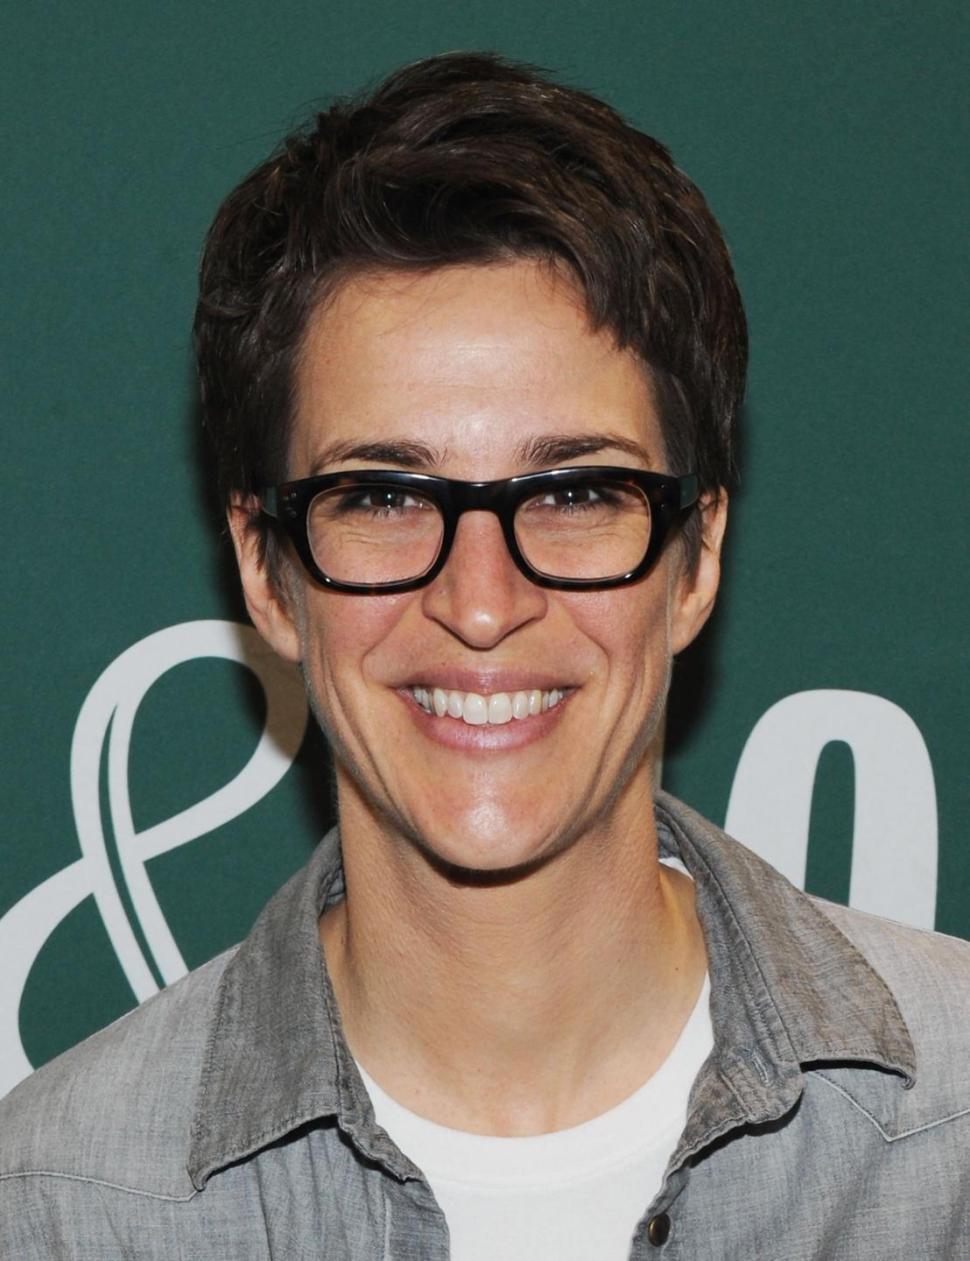 Rachel Maddow and Kevin Spacey had dinner and took in ‘King Lear’ in Central Park.